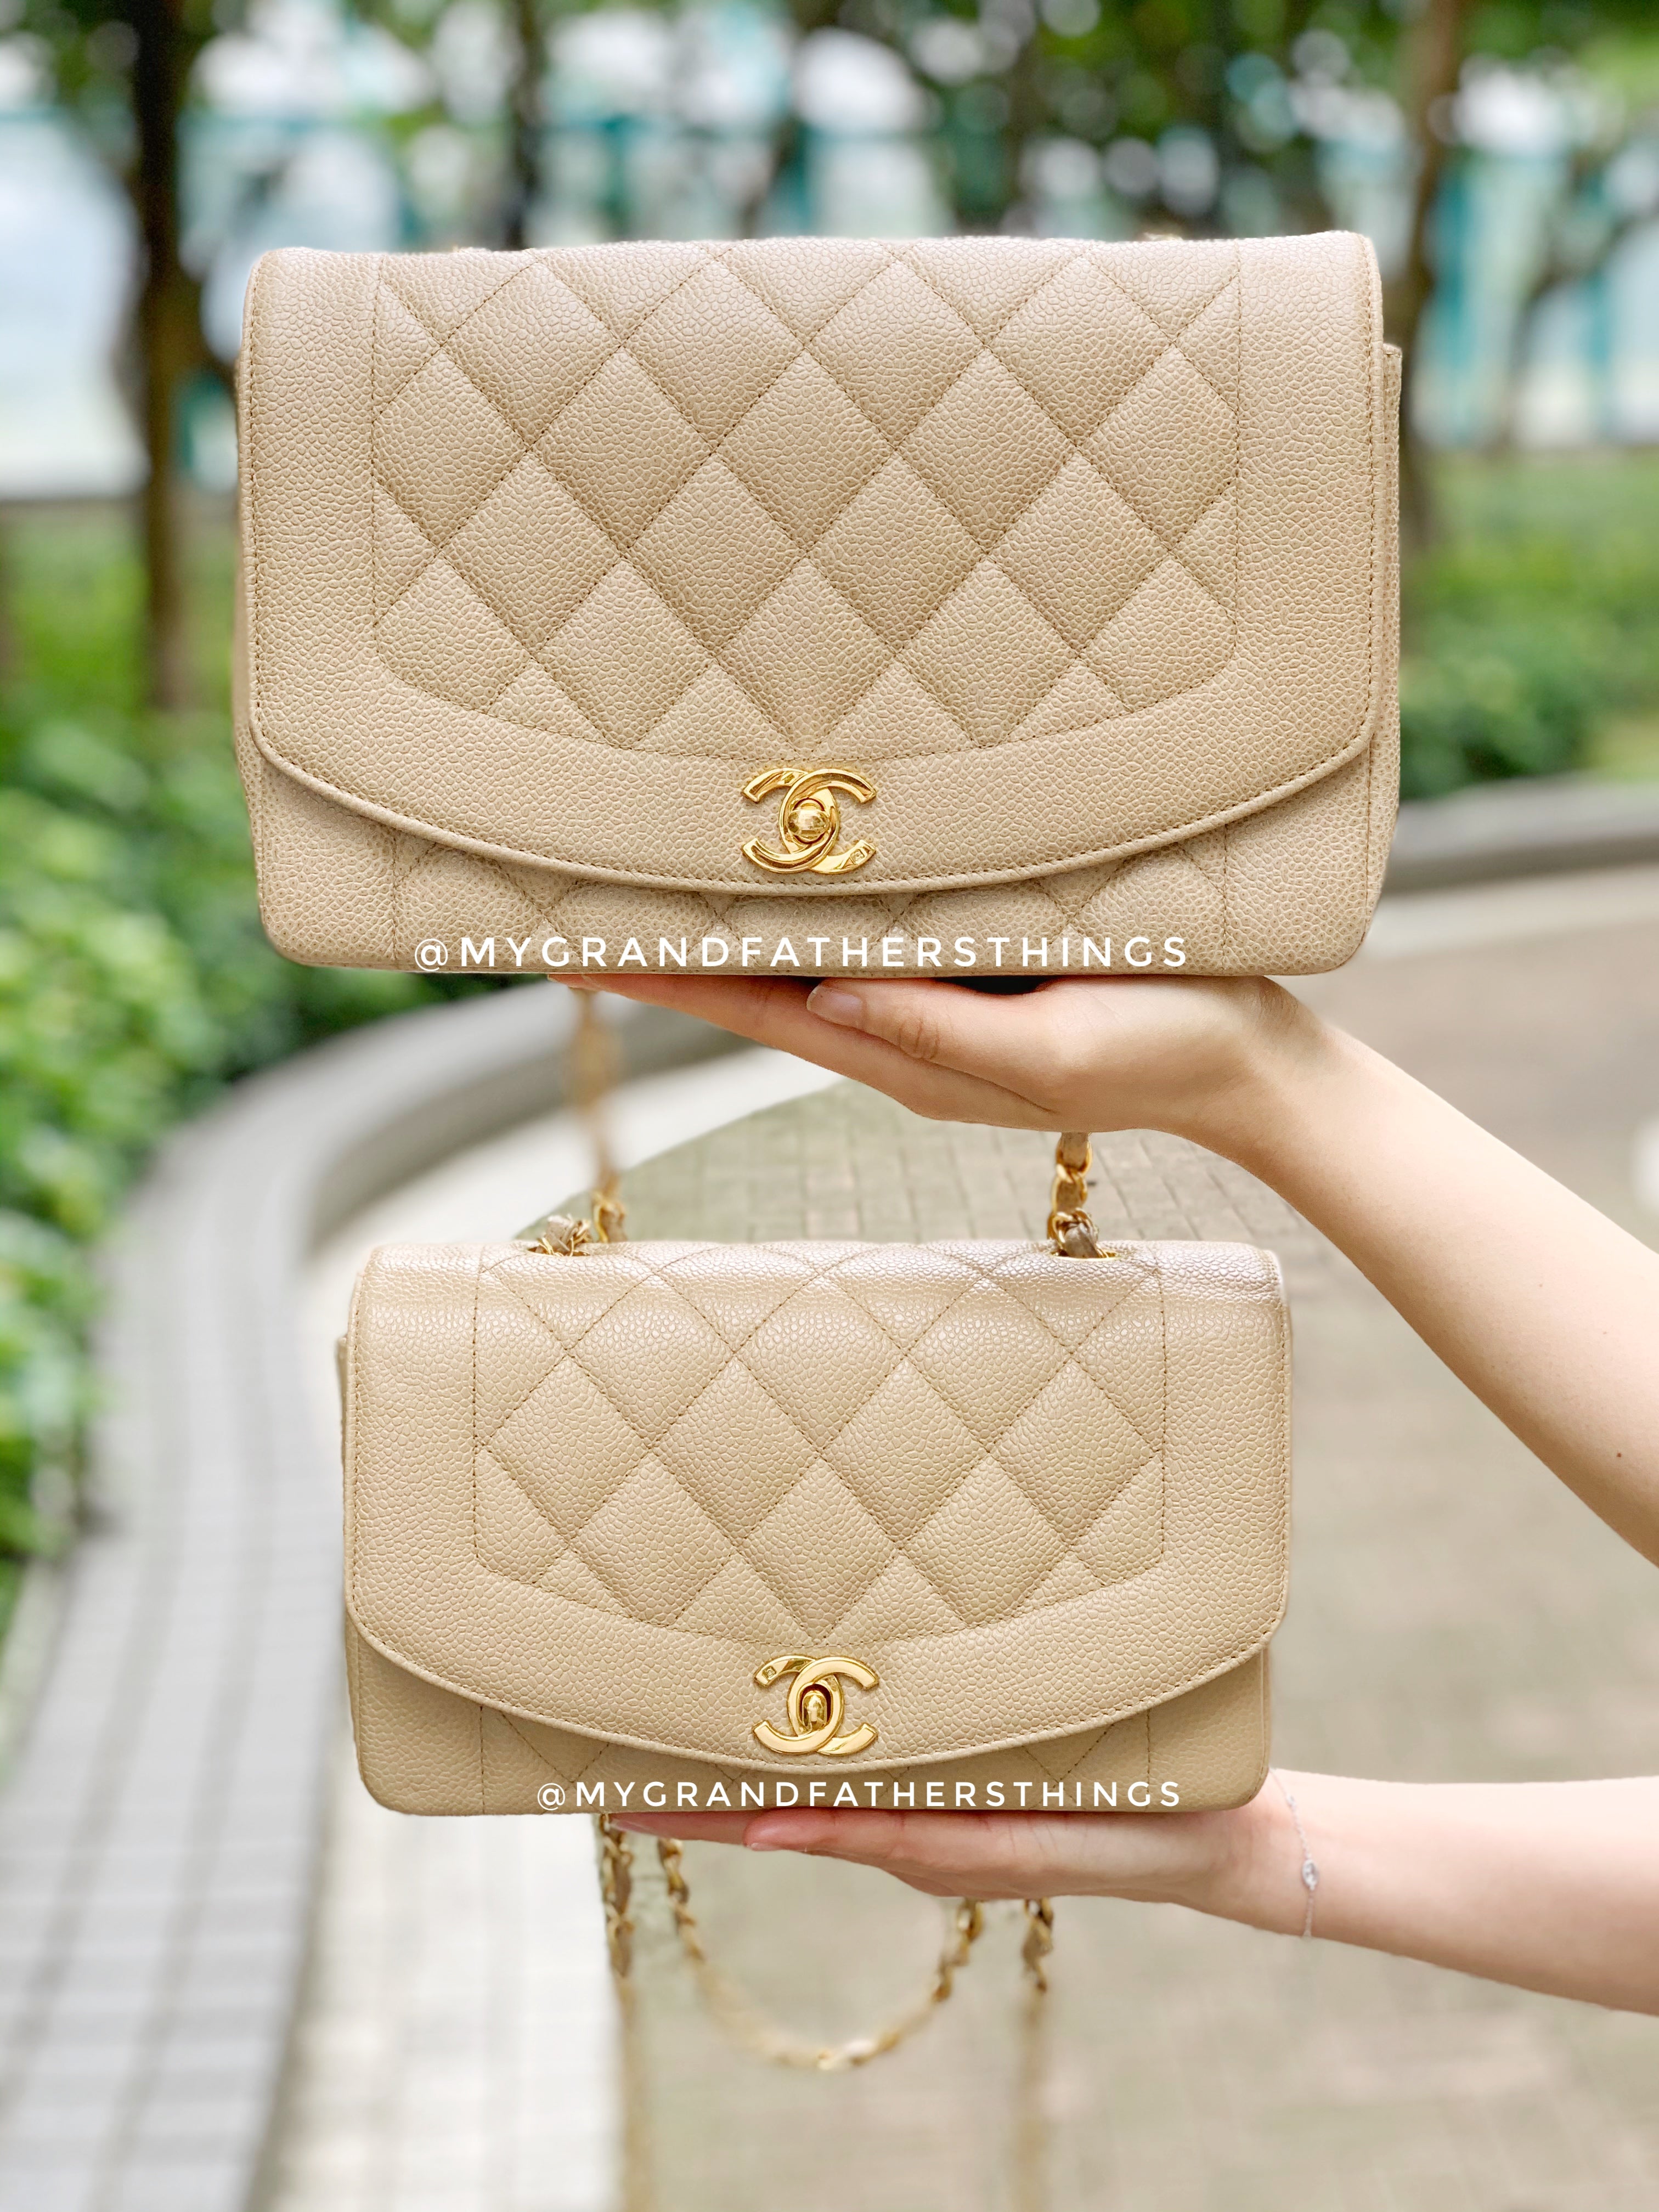 diana chanel small flap